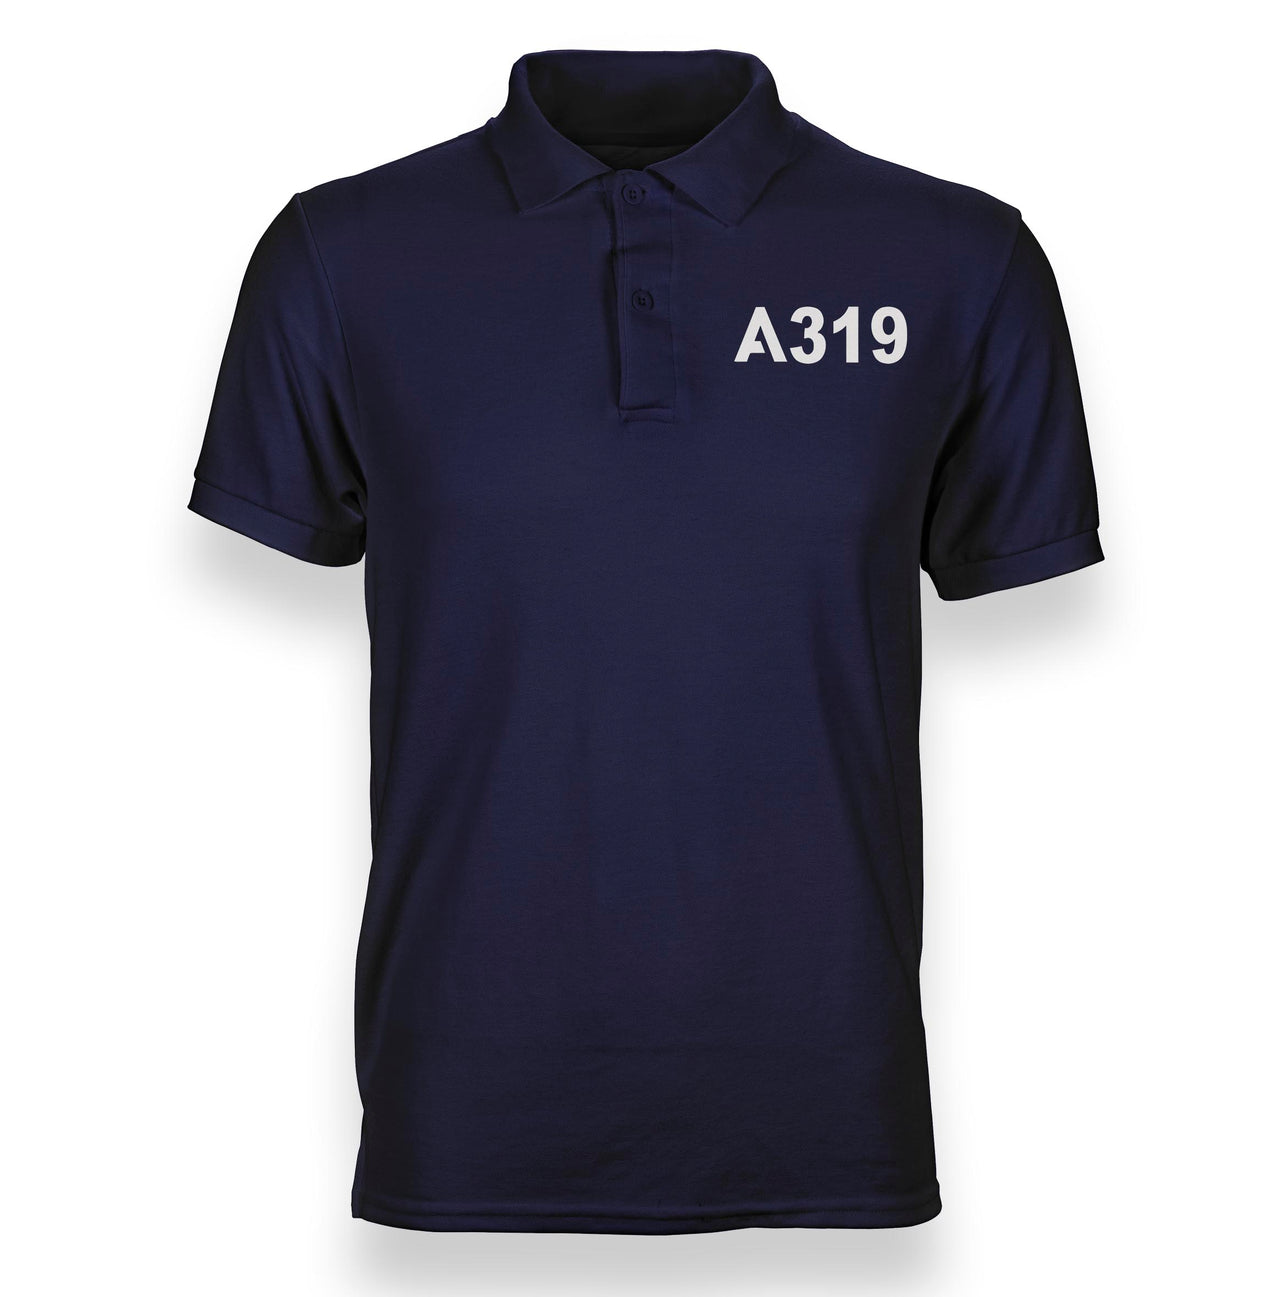 A319 Flat Text Designed Polo T-Shirts